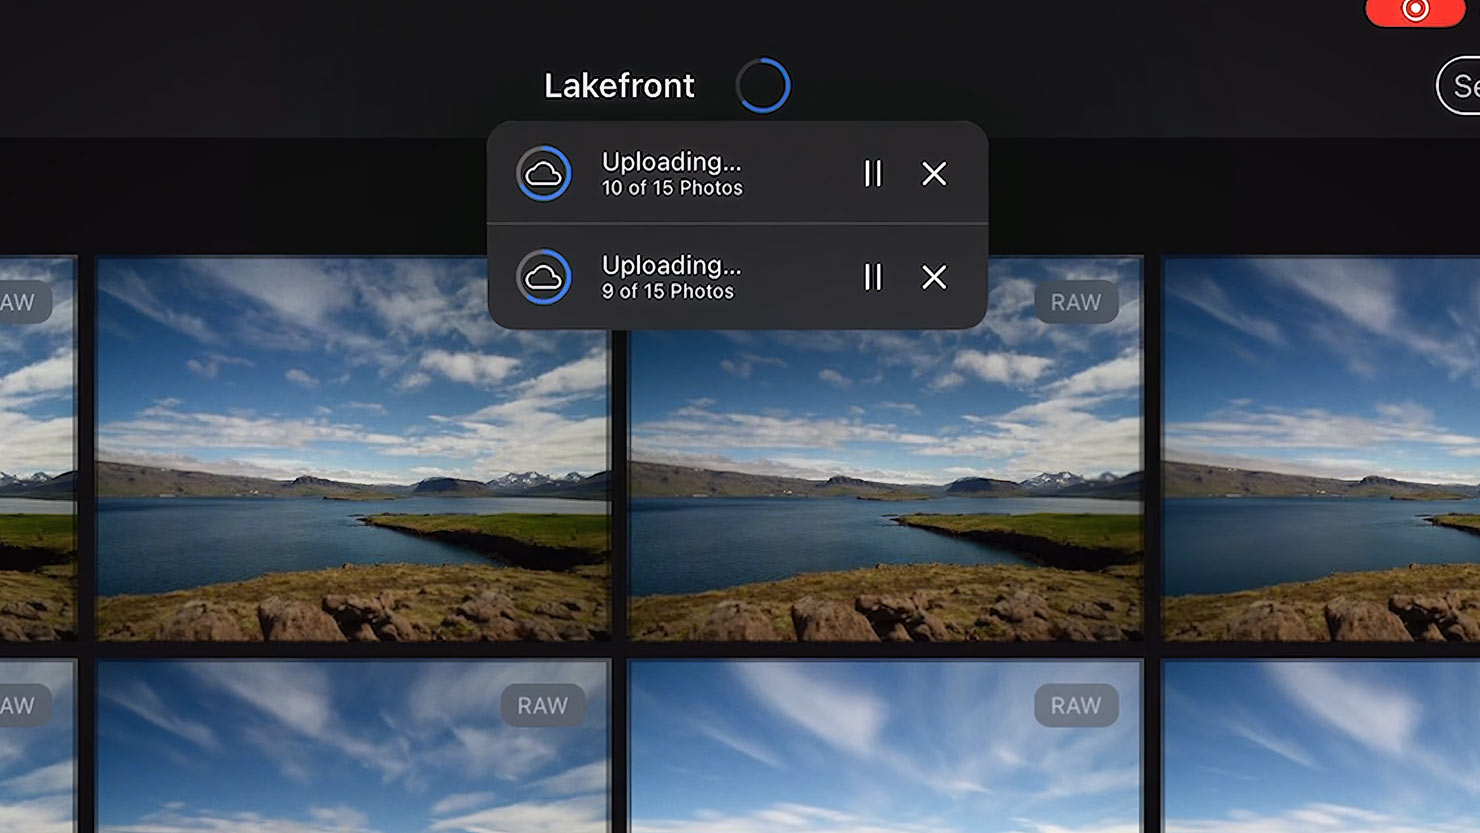 Video Film Still Sync Backup Cloud Mobile Wifi Data Paul Reiffer Capture One iPad Iceland Midnight Sun Shoot Behind The Scenes BTS Filming Phase One